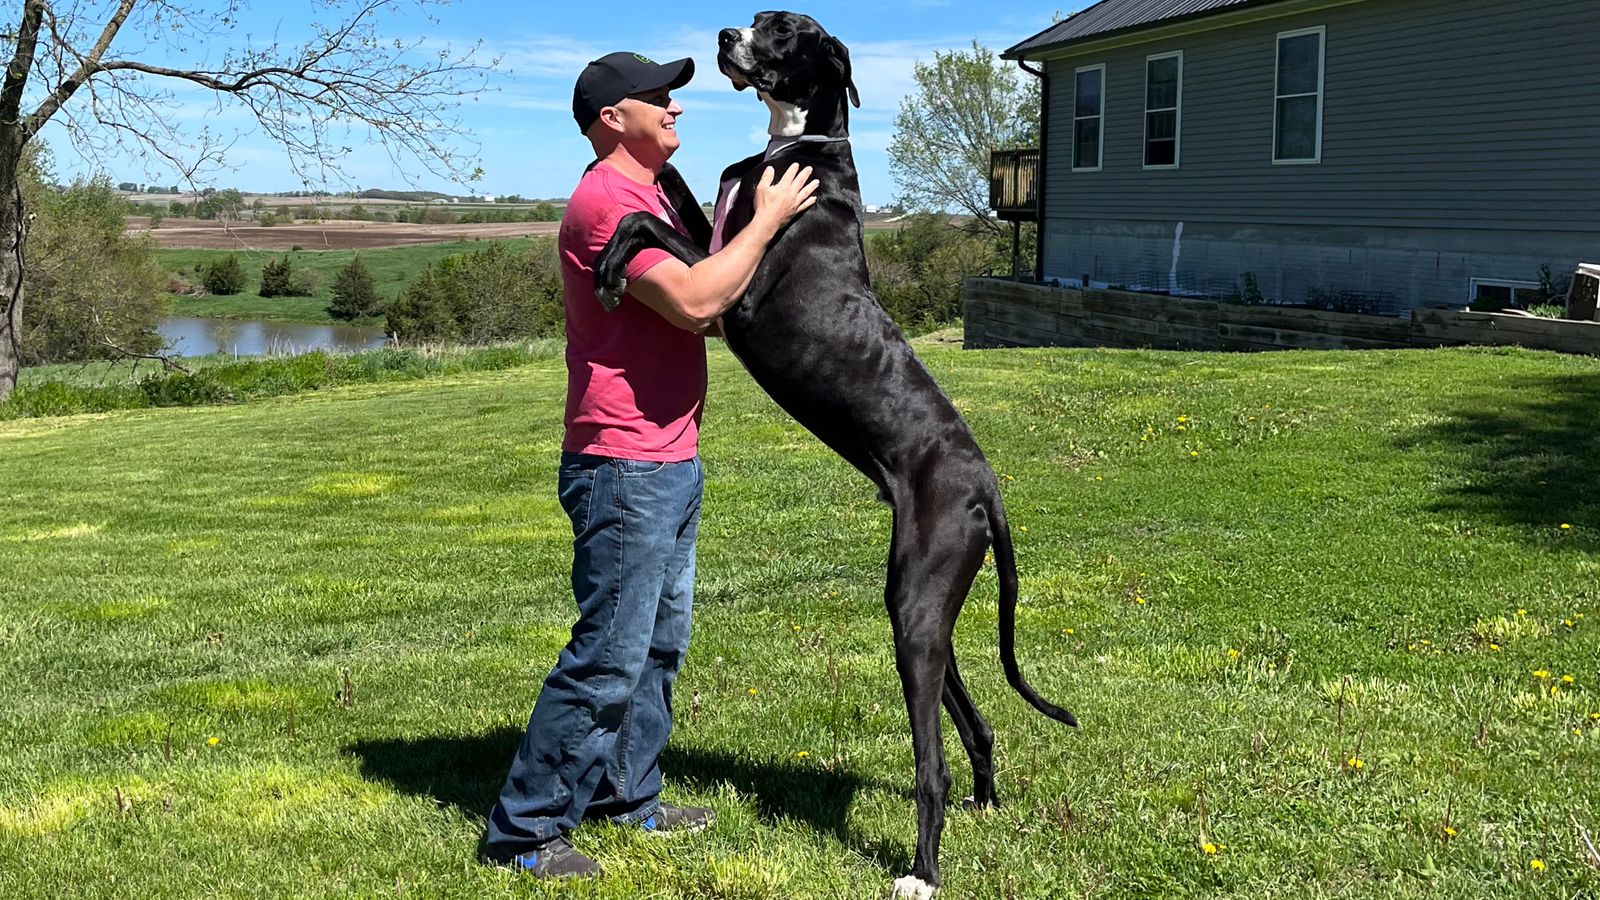 World’s tallest Great Dane is afraid of family’s vacuum, claims US News